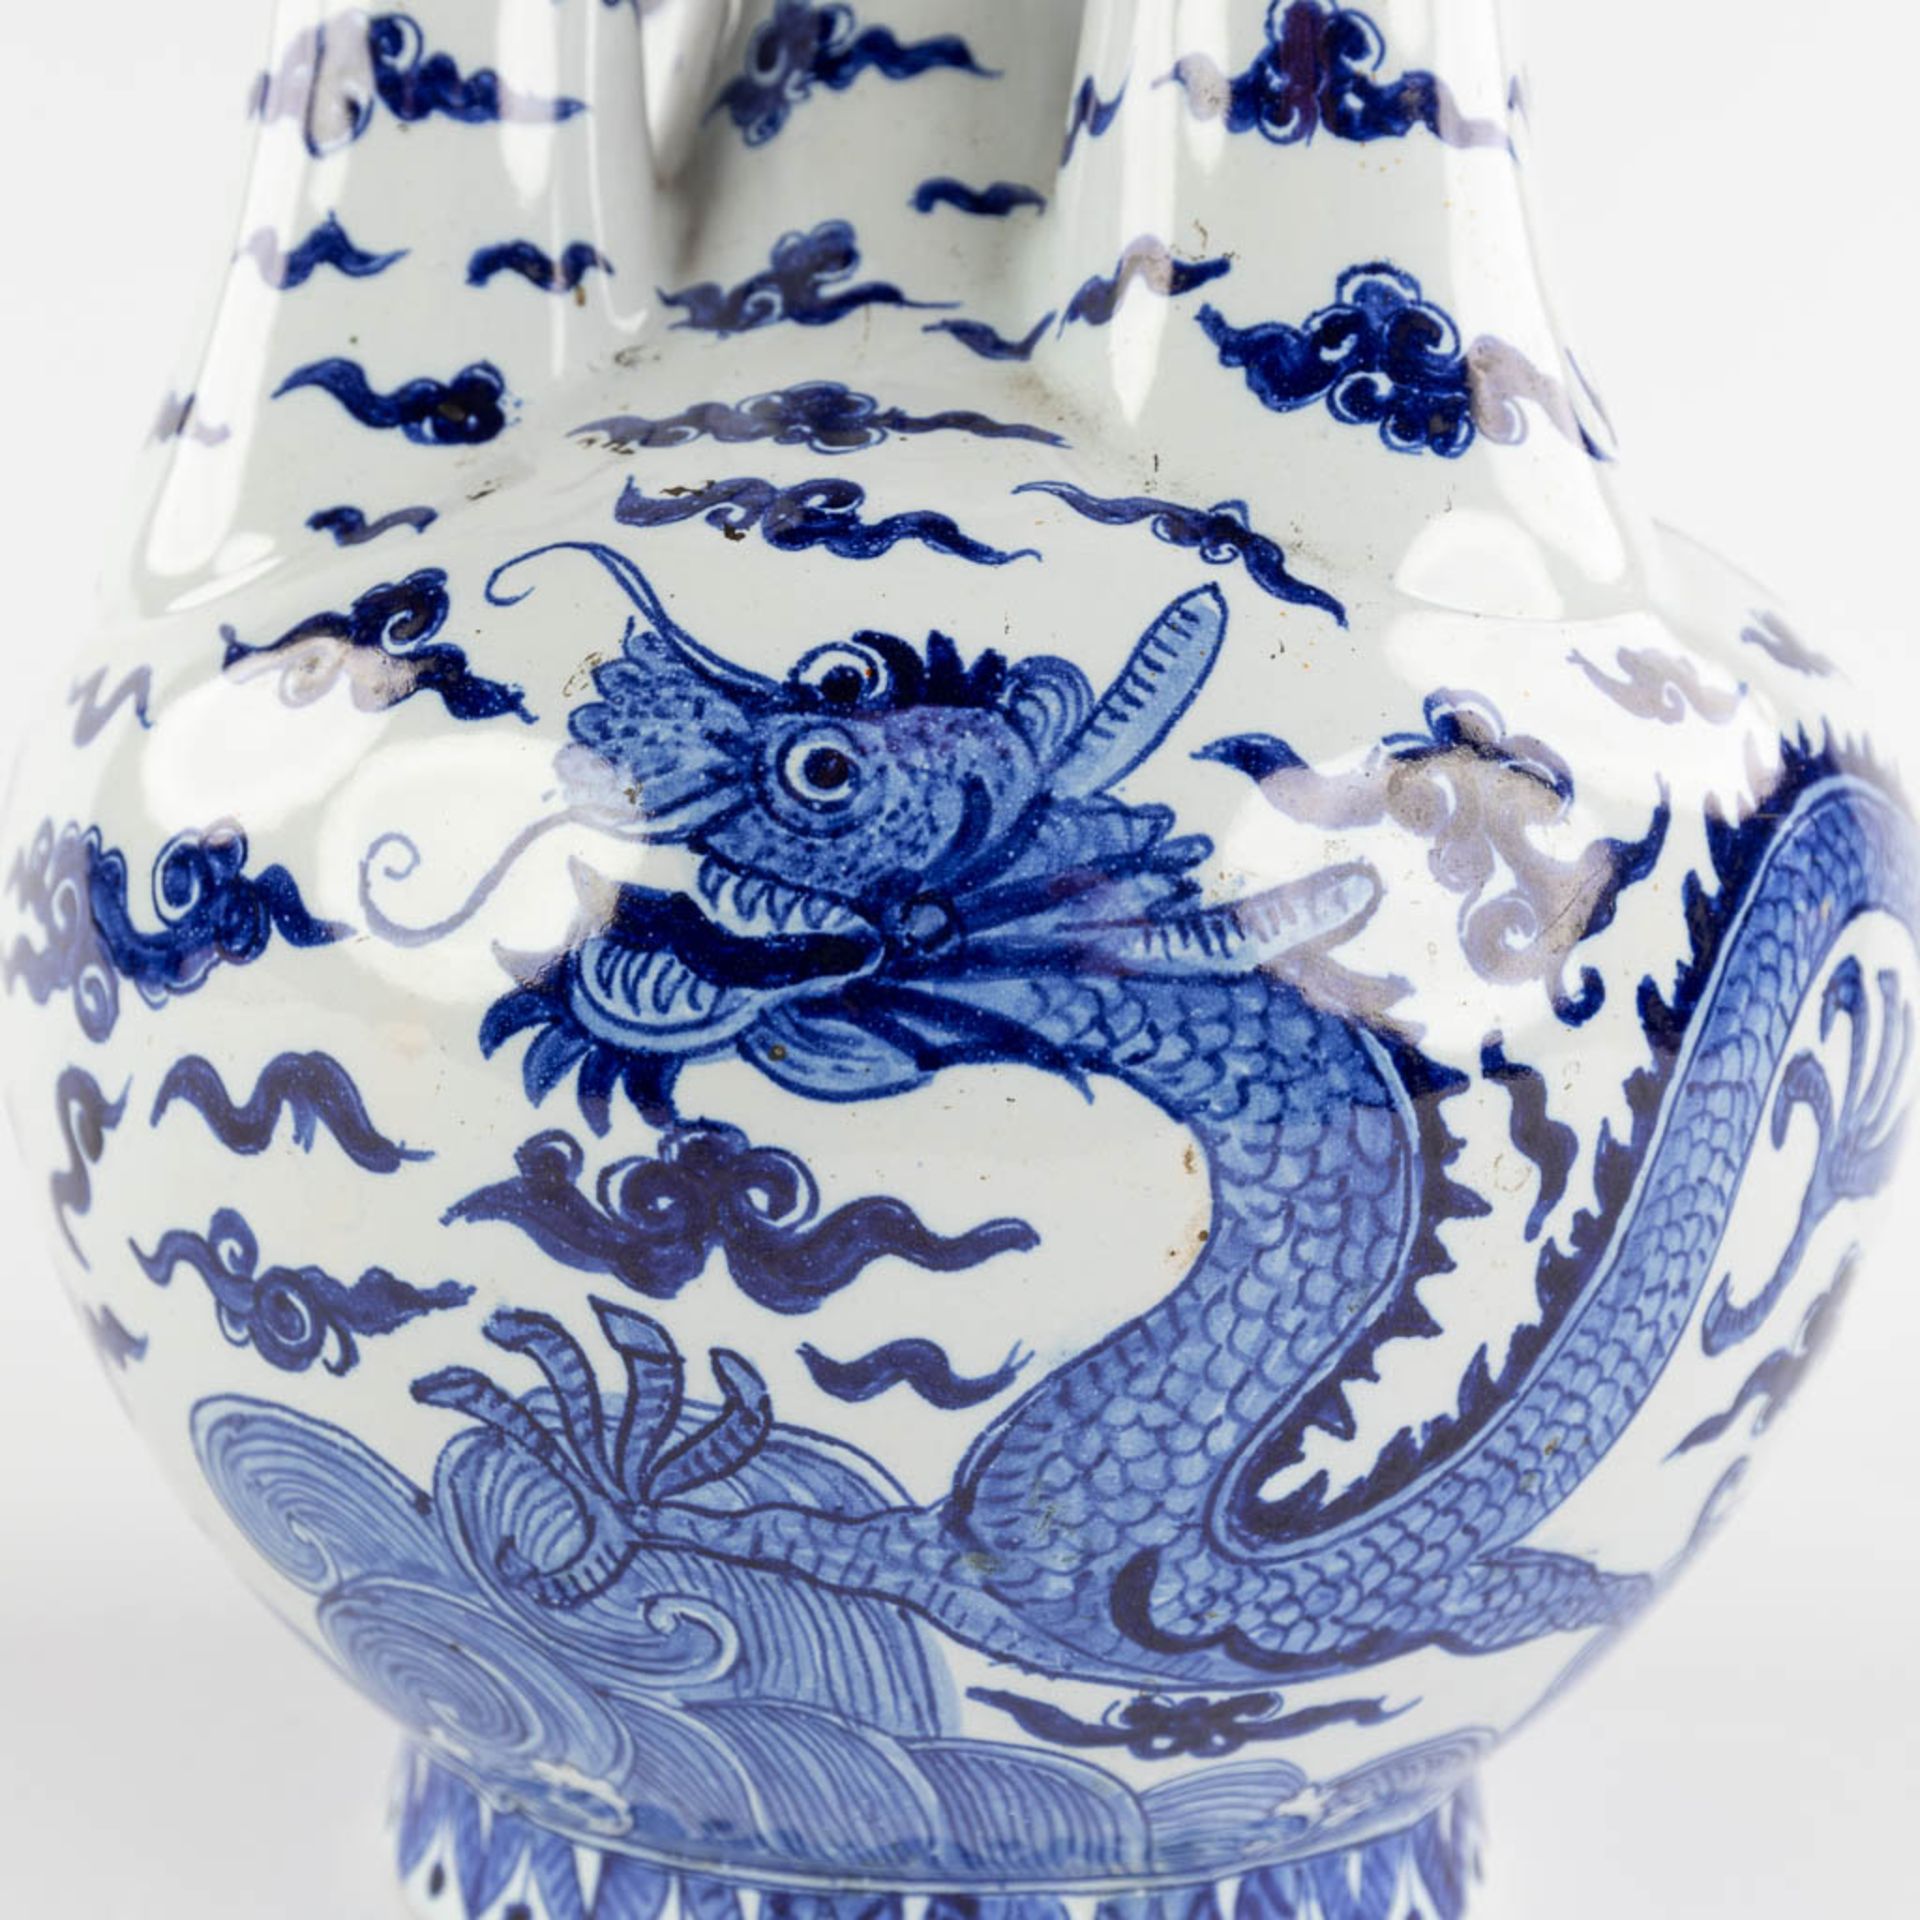 Charles-François Fourmaintraux-Courquin, a tulip vase with Chinoiserie dragon decor France. 19th C. - Image 14 of 15